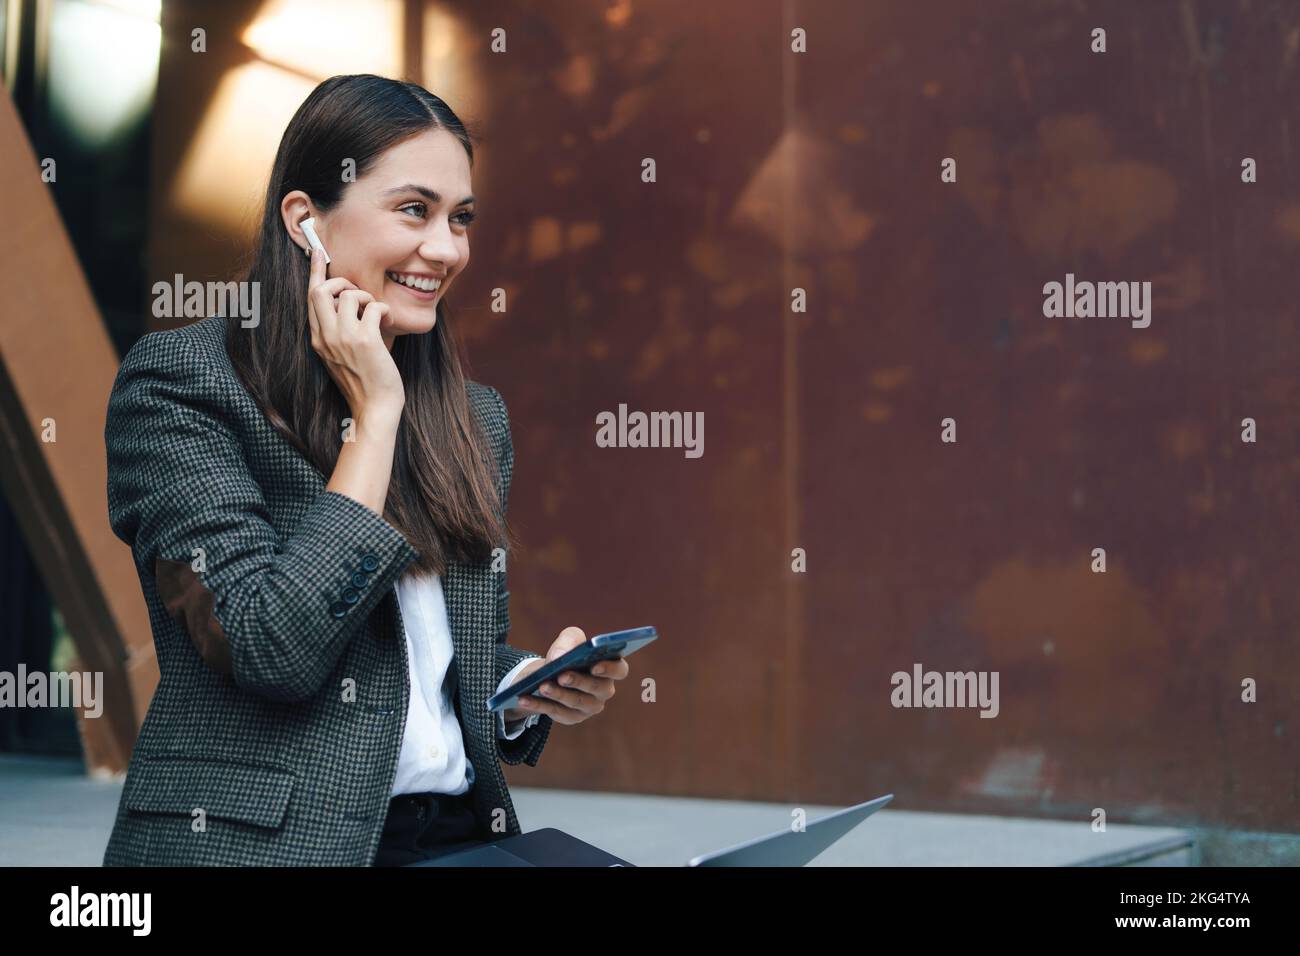 Side view of a business woman holding laptop near office outdoors, using mobile phone. Traveling, working outdoors in city, working on laptop computer Stock Photo